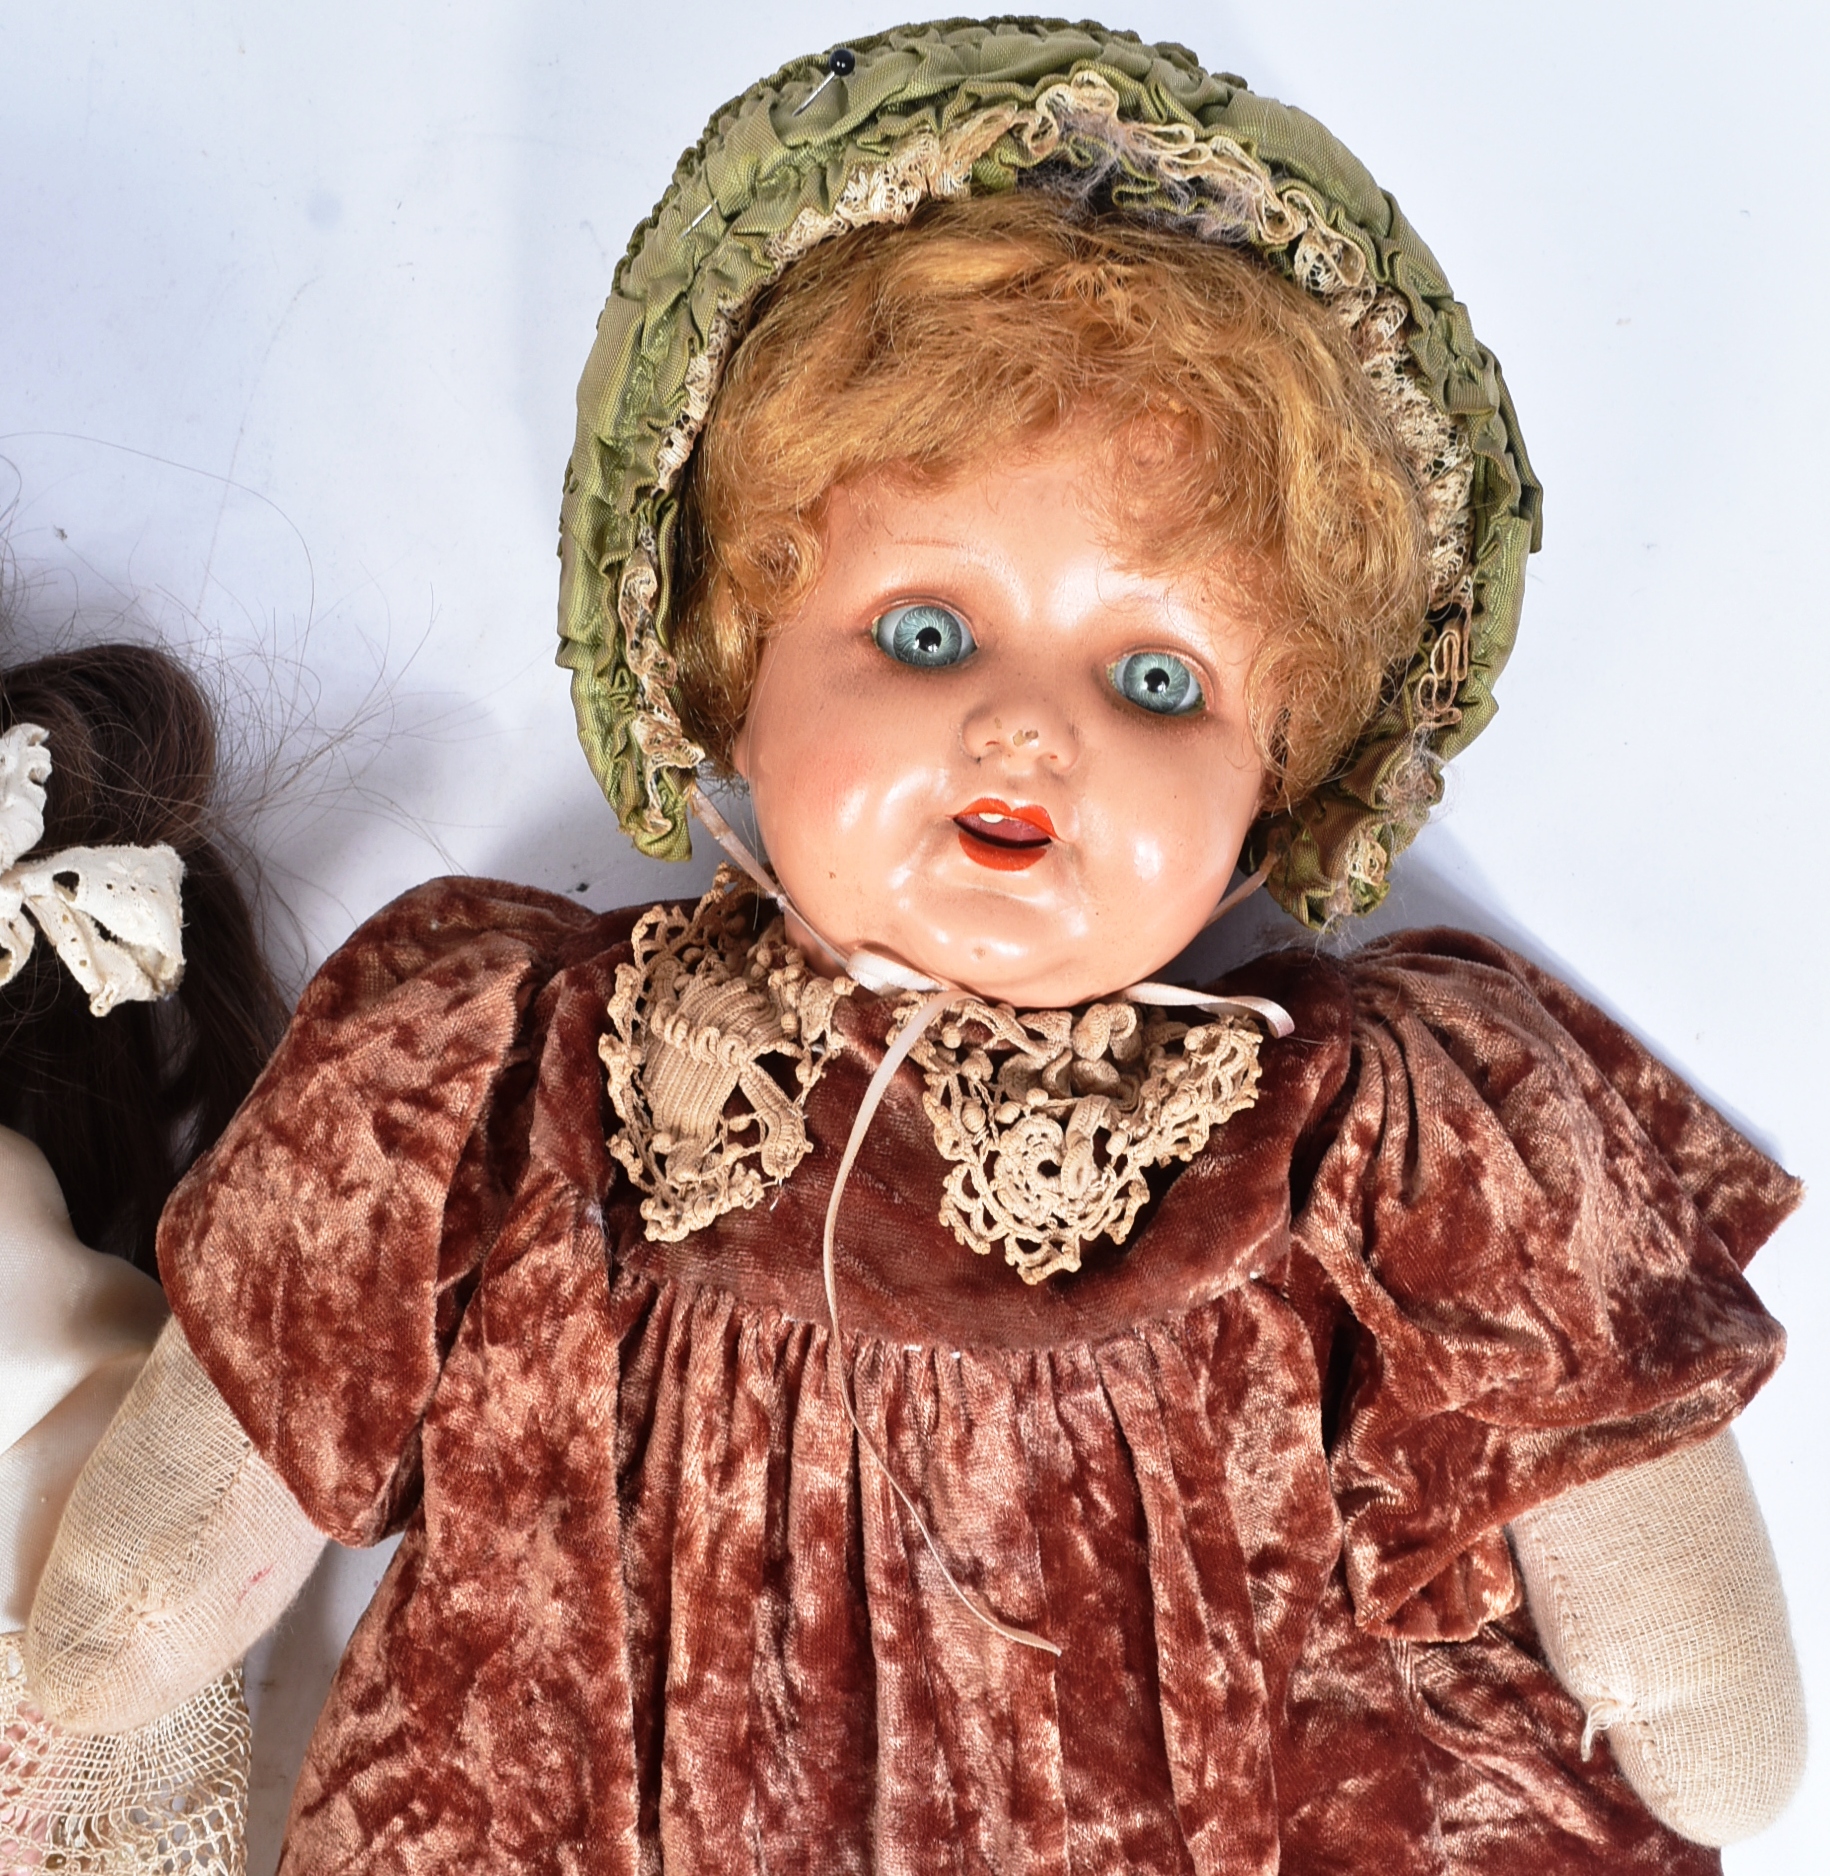 TWO EARLY 20TH CENTURY BISQUE HEADED DOLLS - Image 2 of 7